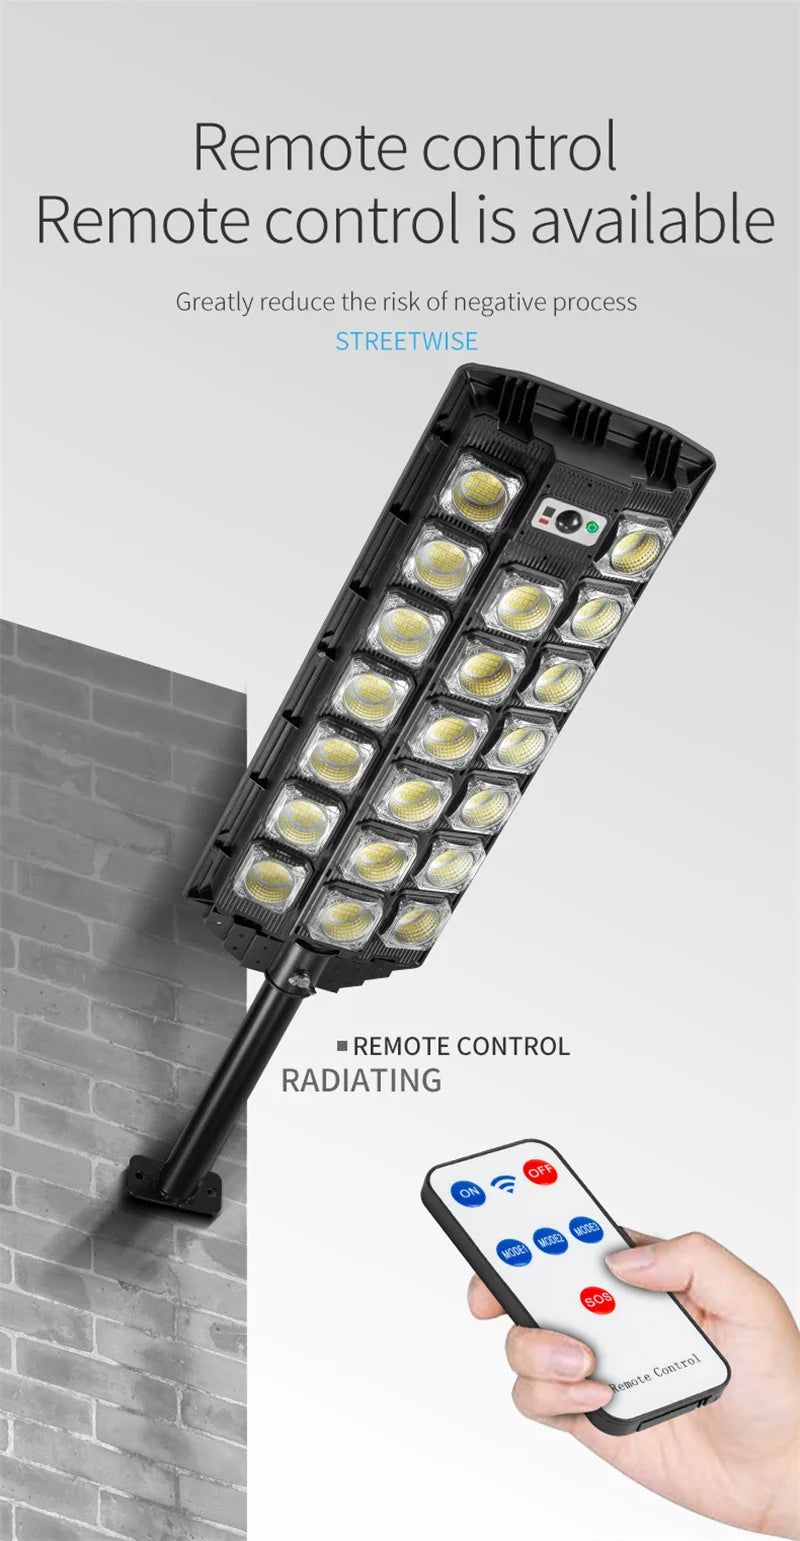 15000LM Solar Street Light, Conveniently control settings and brightness remotely, reducing setup hassle.